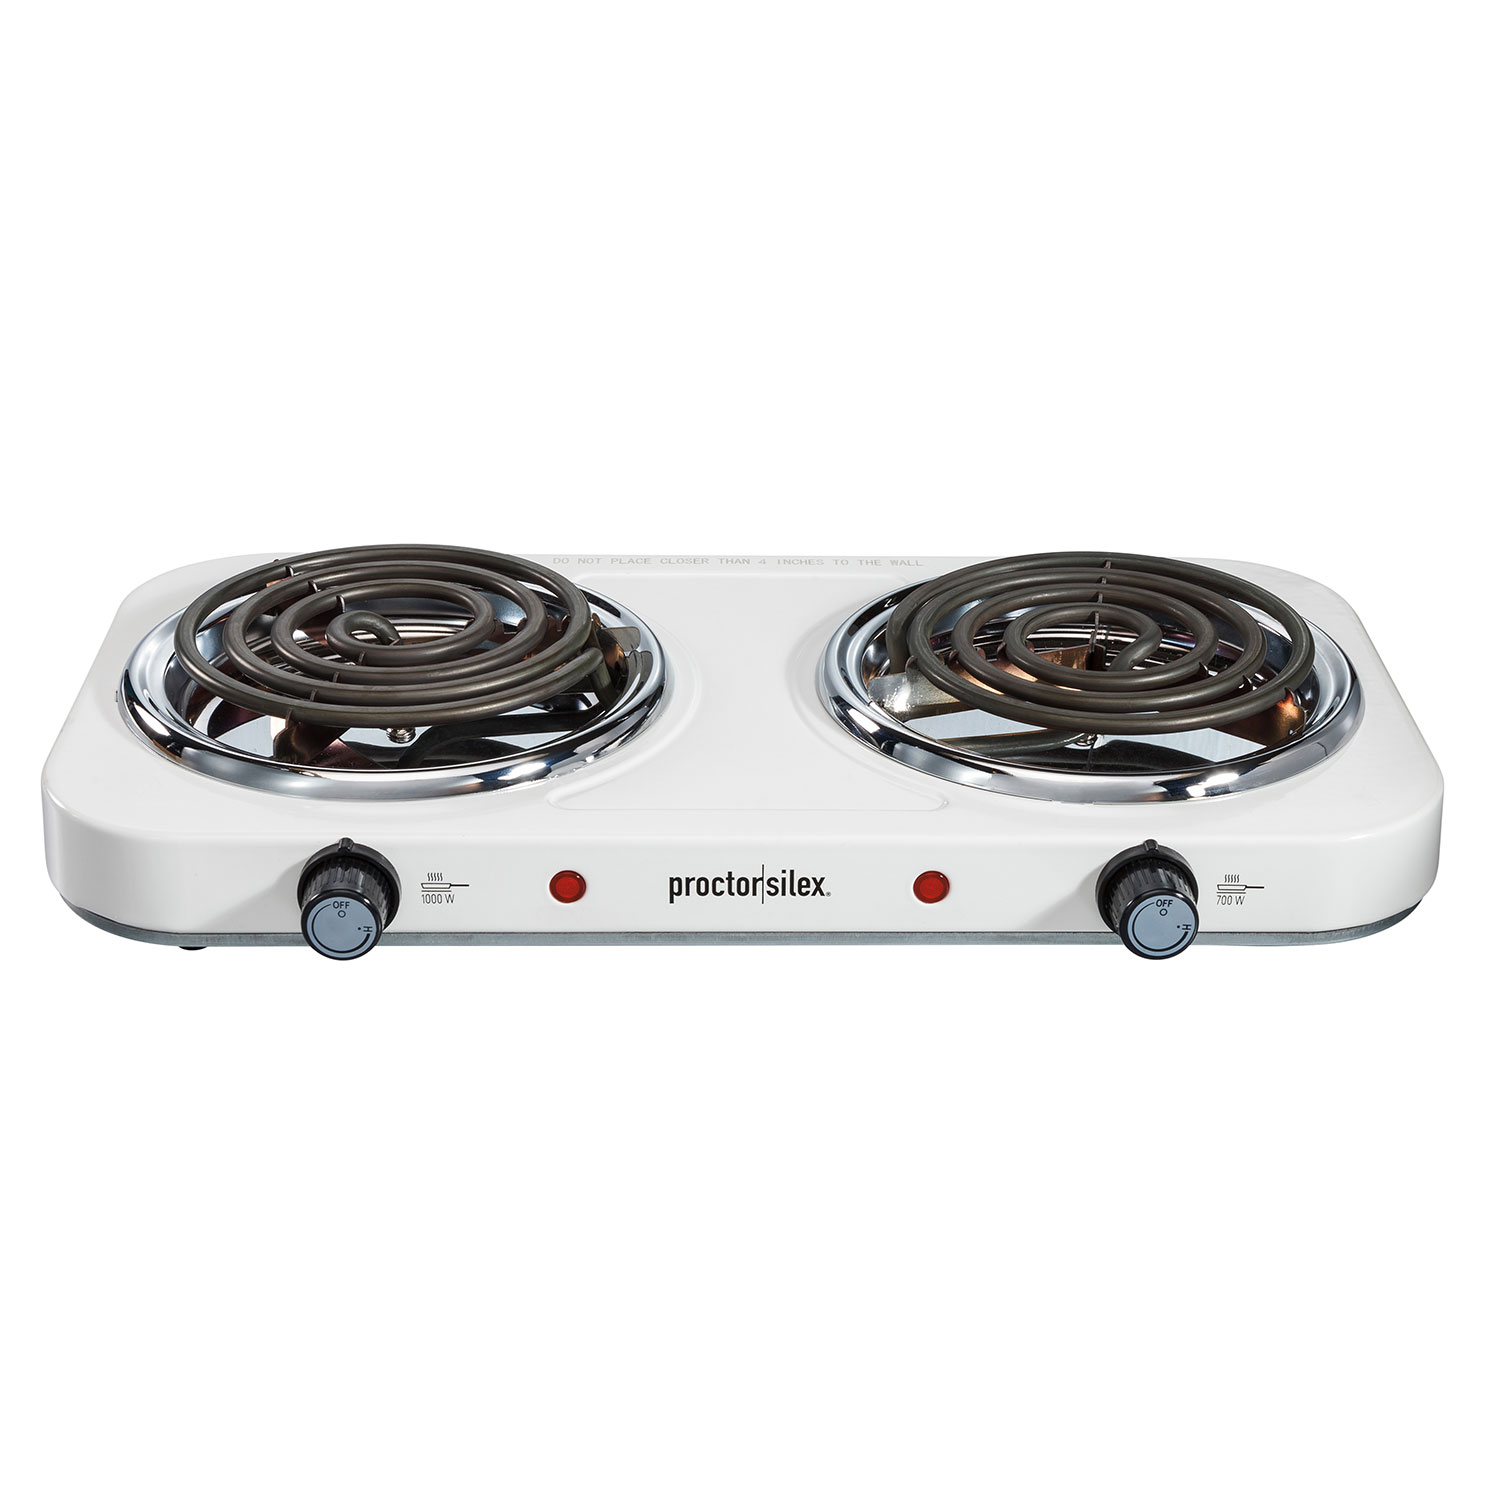 Double Electric Burner Cooktop with Adjustable Temperature, White - 34116 Small Size